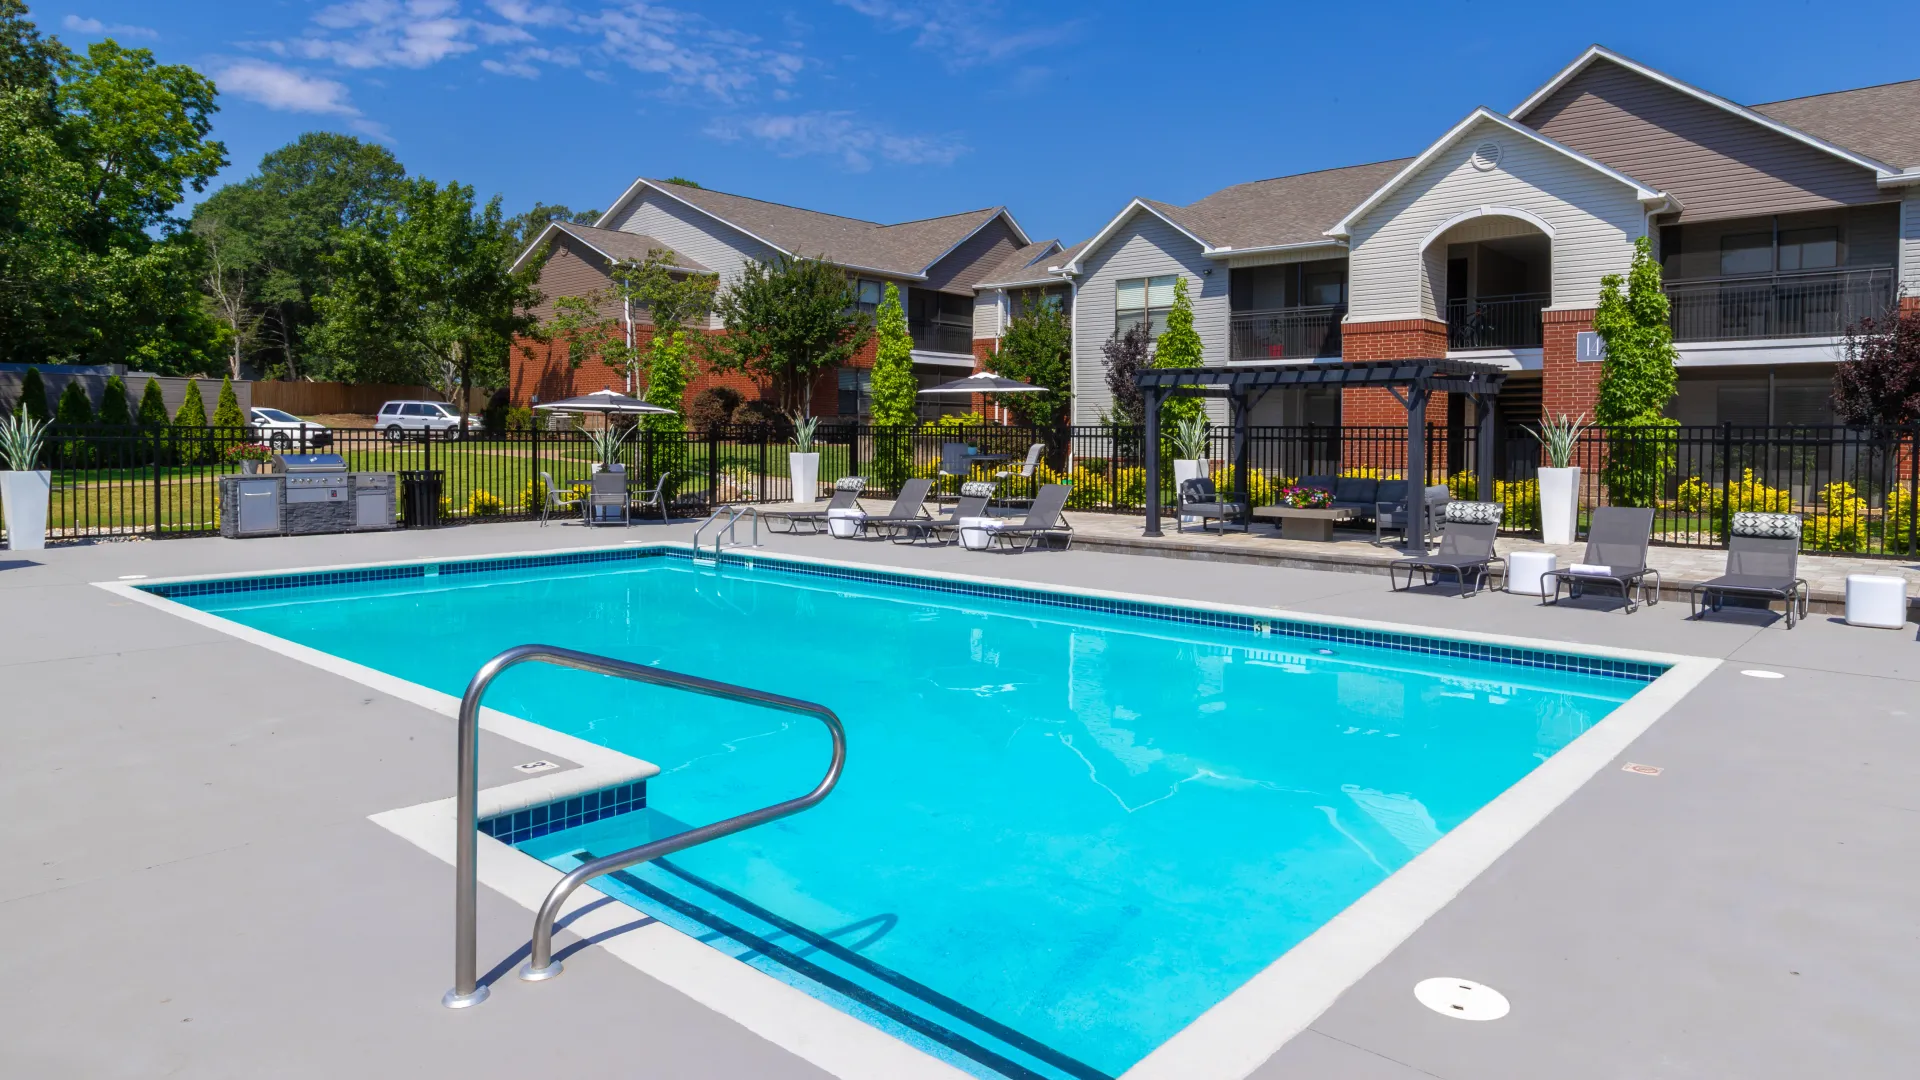 Outdoor swimming pool area featuring loungers, a BBQ area, and surrounding apartment buildings.